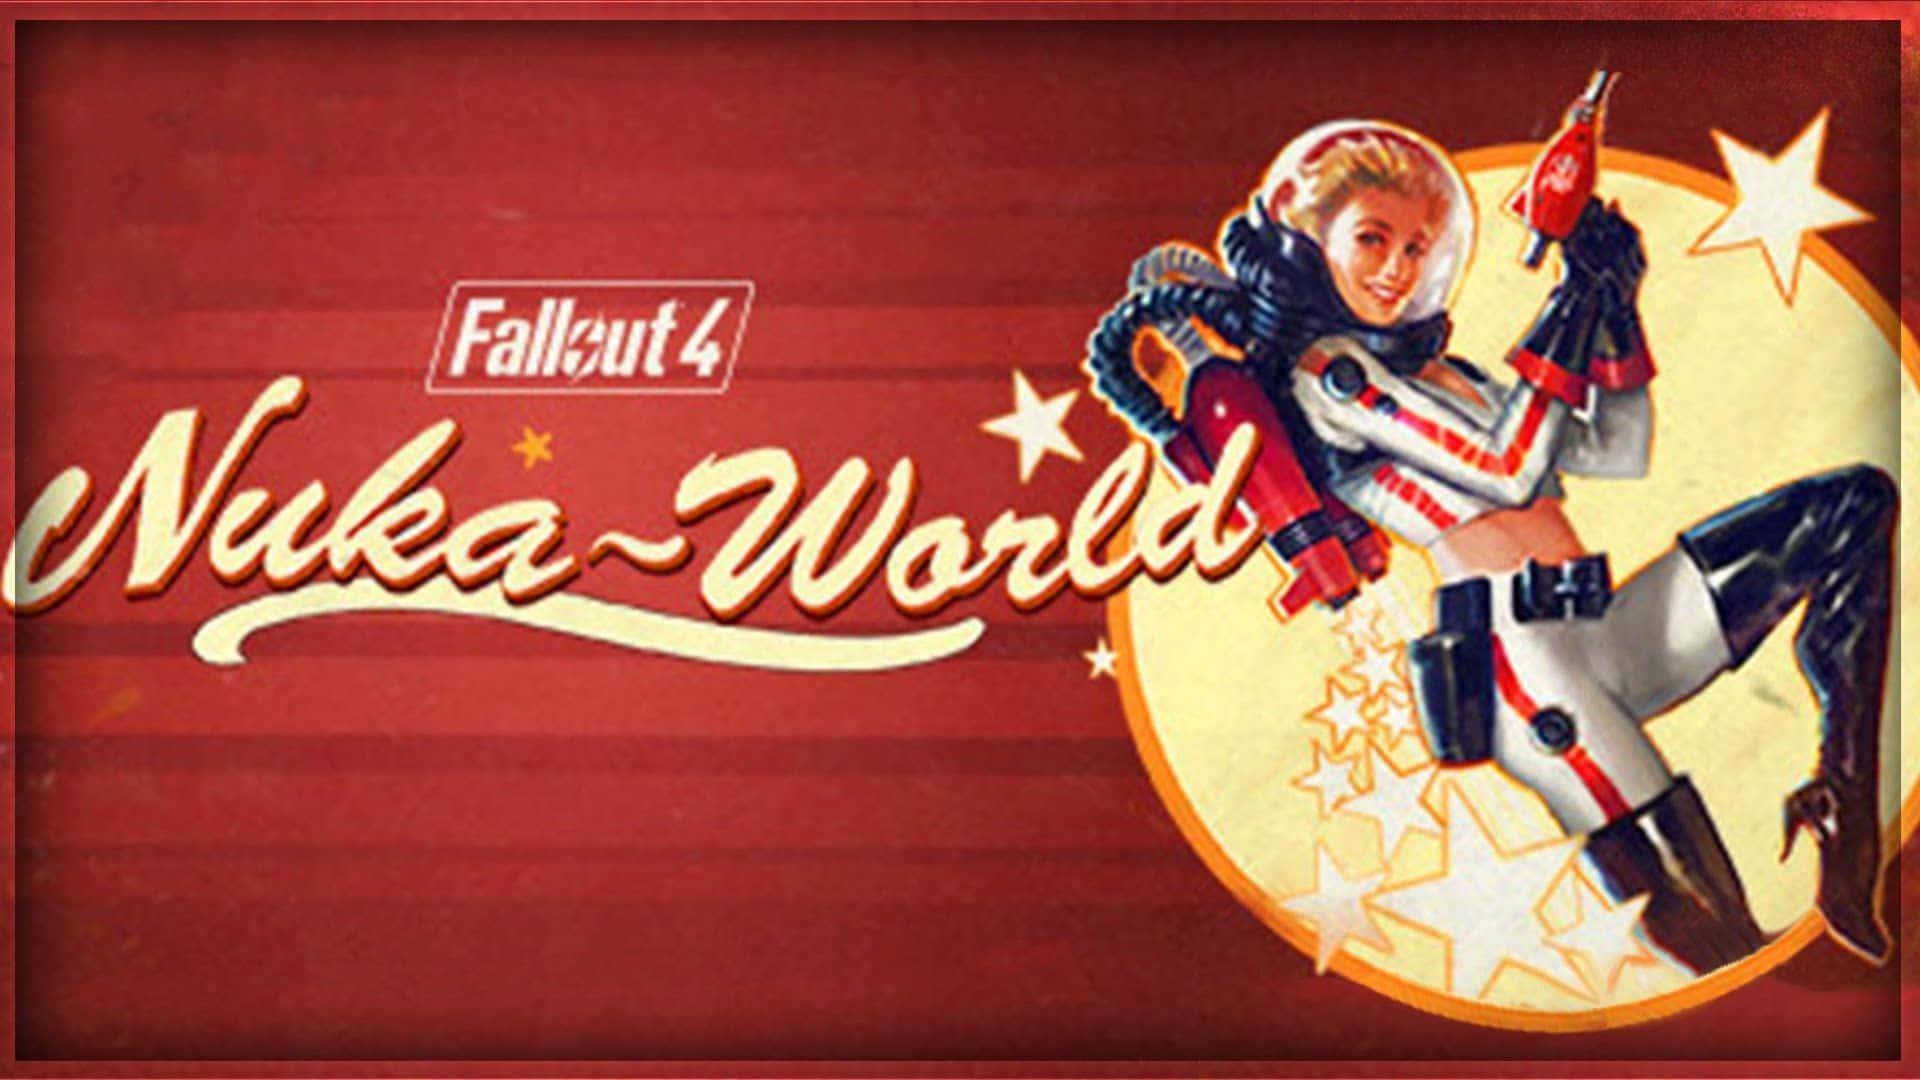 Satisfy your cravings with Nuka Cola! Wallpaper